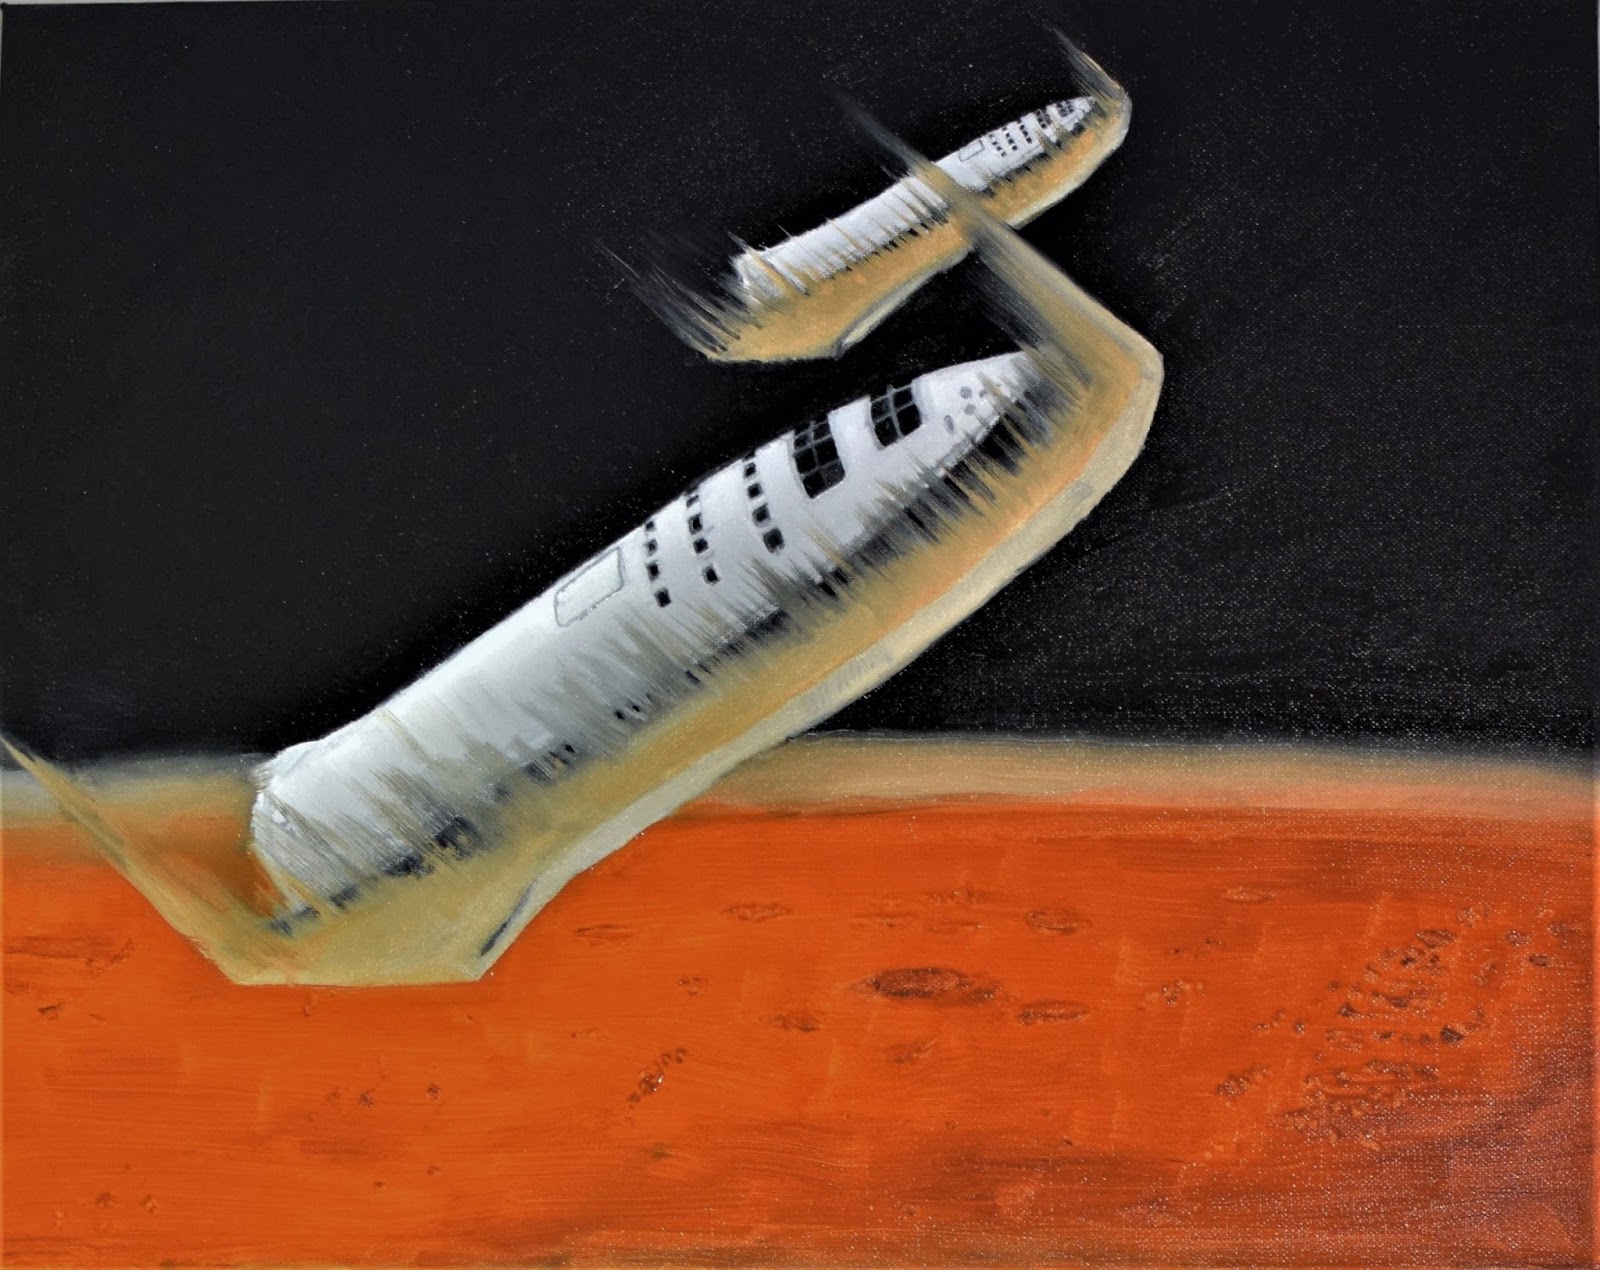 Painting of two SpaceX BFR spaceships entering Mars atmosphere